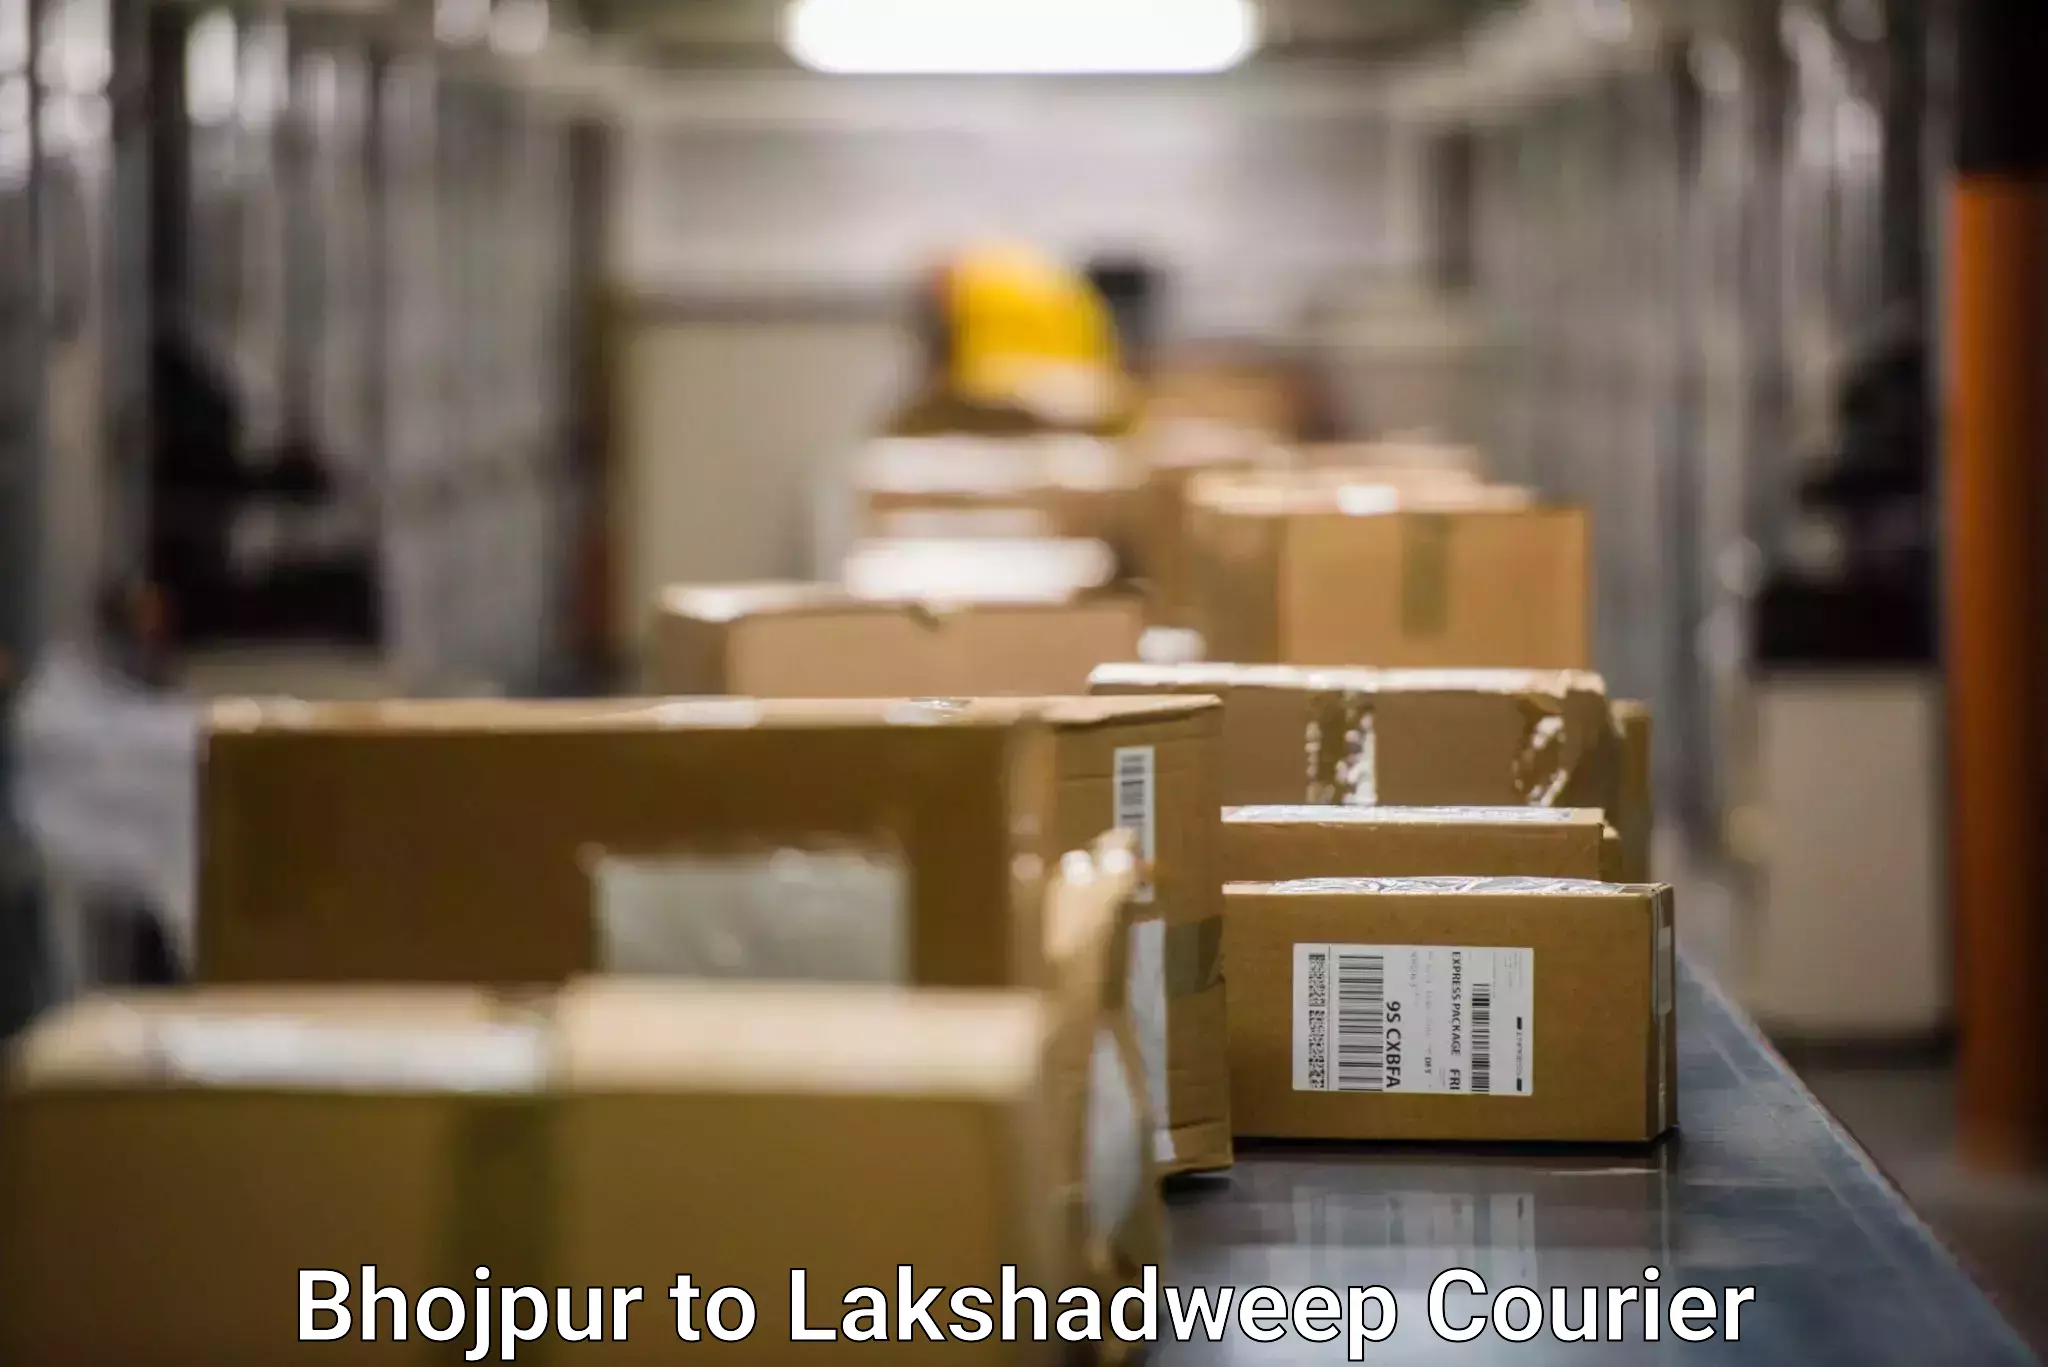 On-call courier service Bhojpur to Lakshadweep